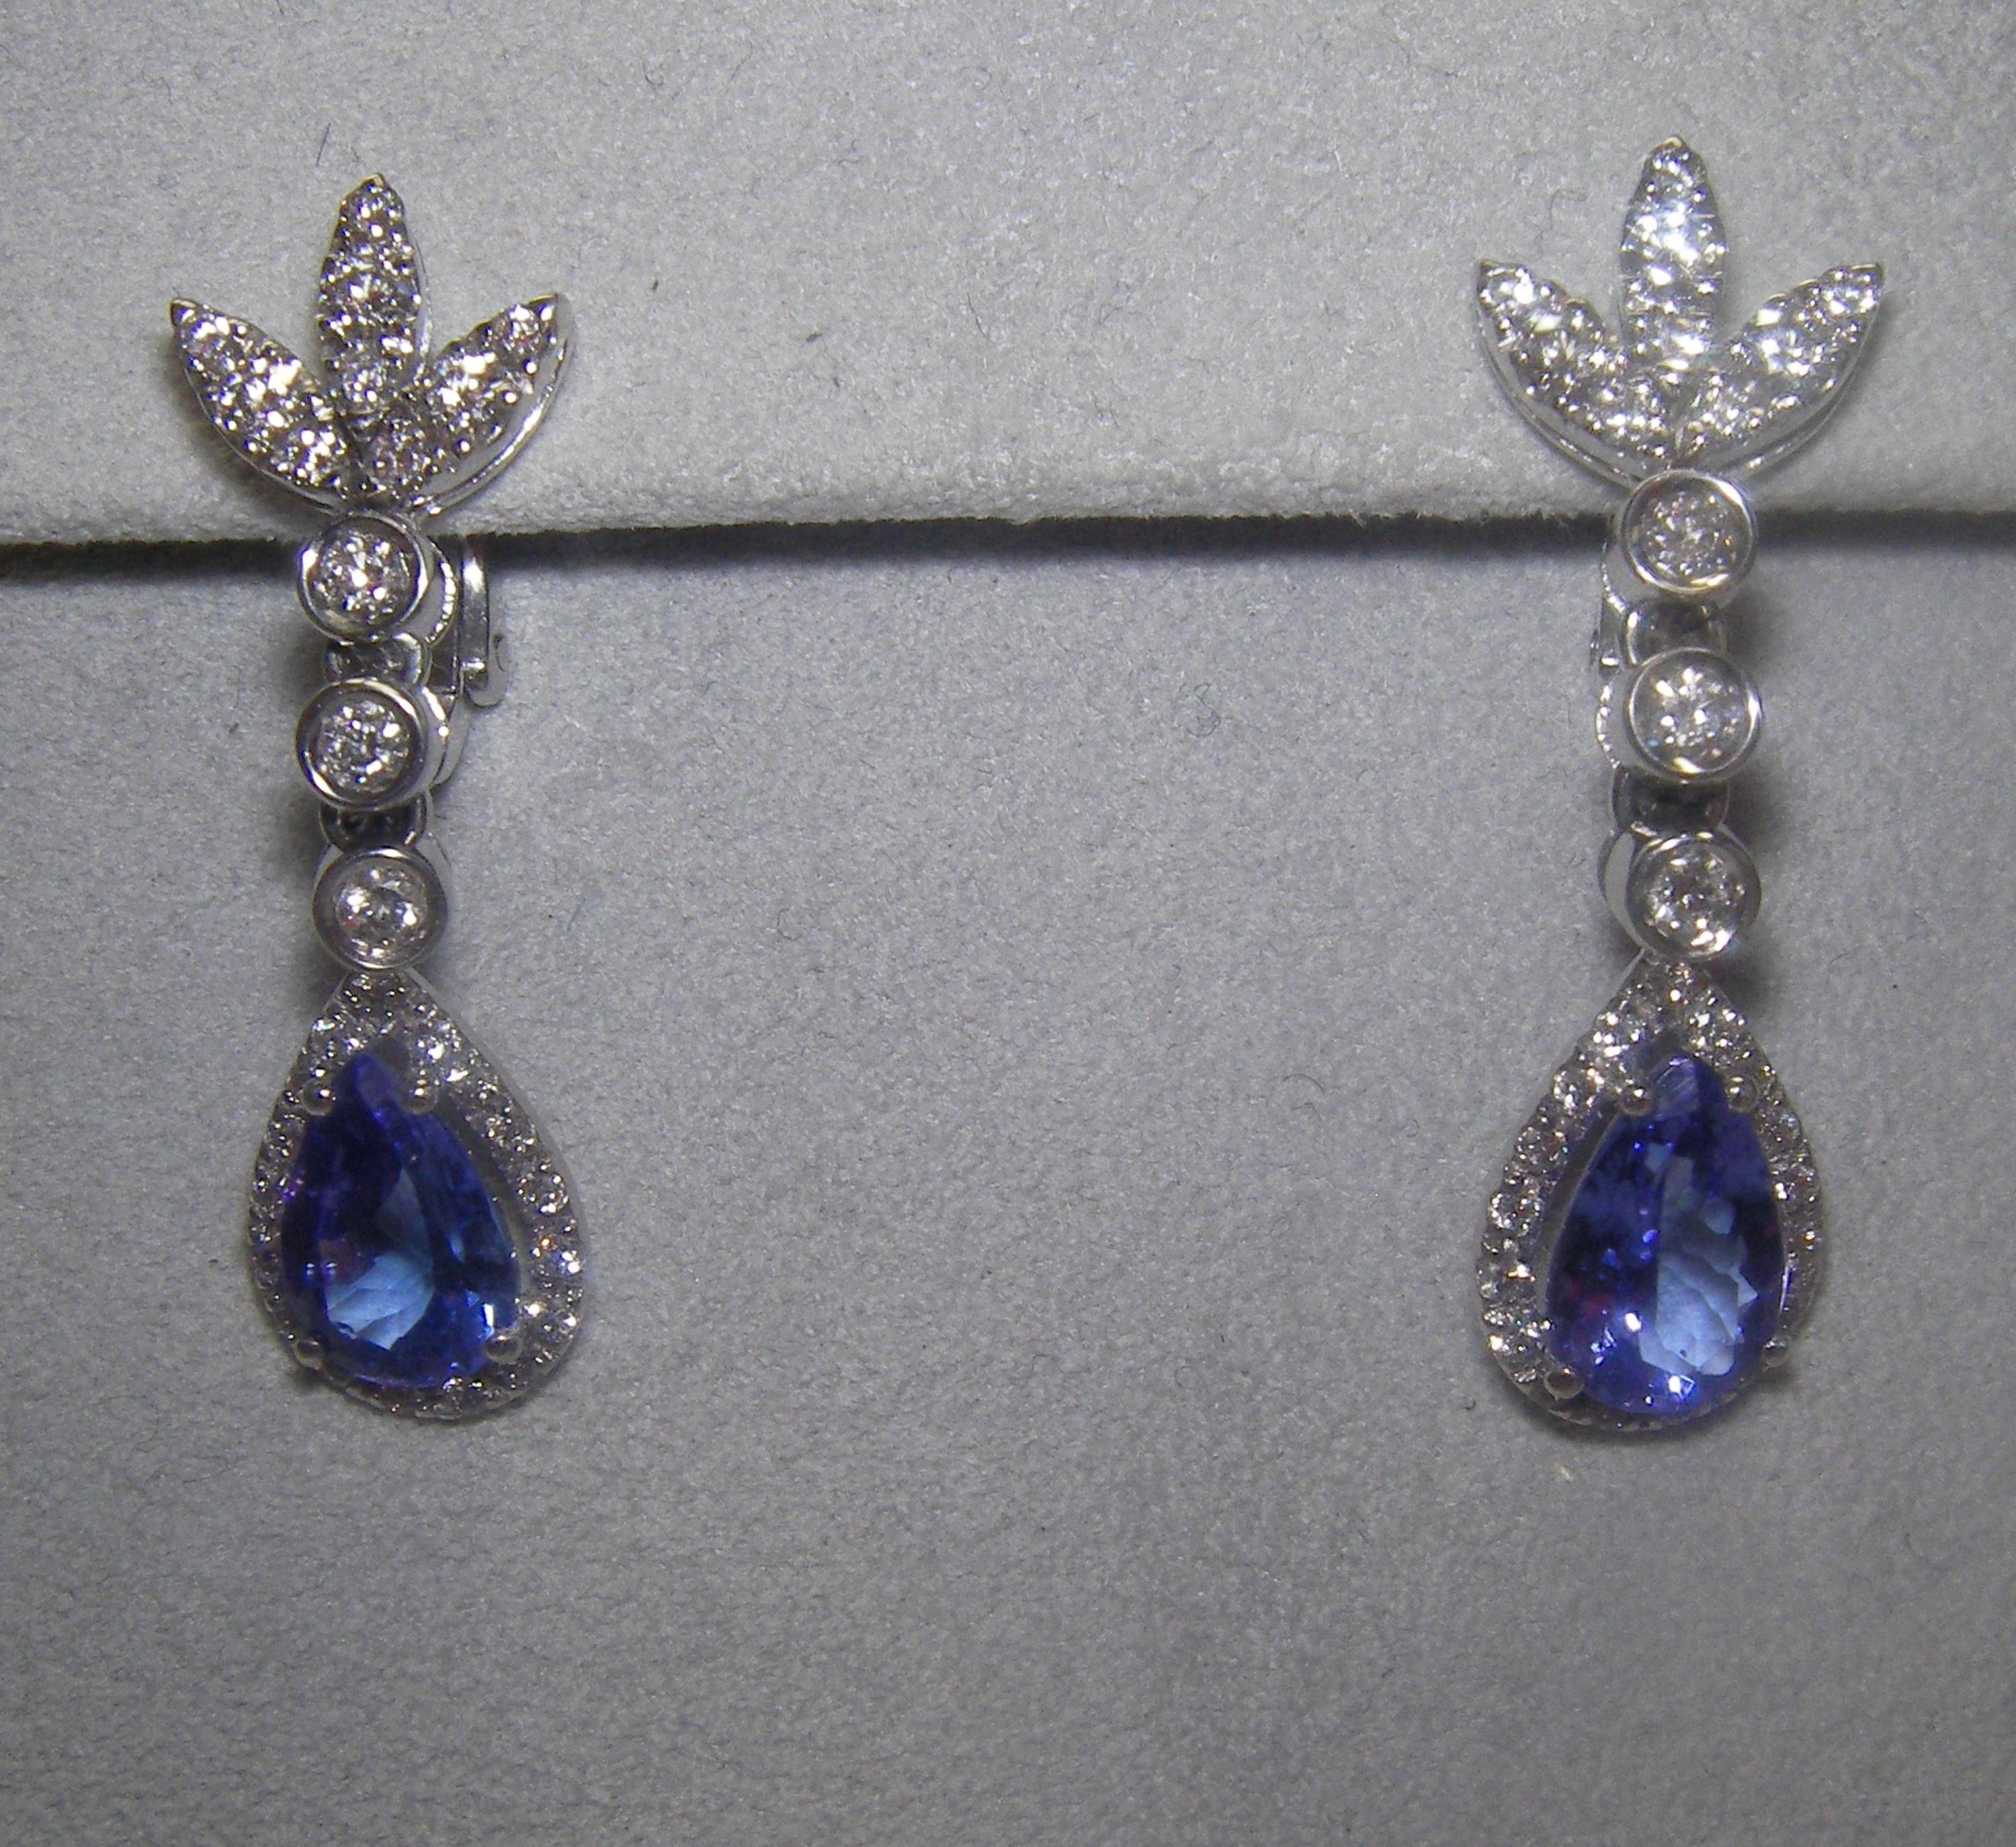 18 Karat White Gold Diamond and Tanzanite Dangle Earrings



2 Tanzanite cab. 2,76 Carats
58  Diamonds 0,92 Carats


Founded in 1974, Gianni Lazzaro is a family-owned jewelery company based out of Düsseldorf, Germany.
Although rooted in Germany,